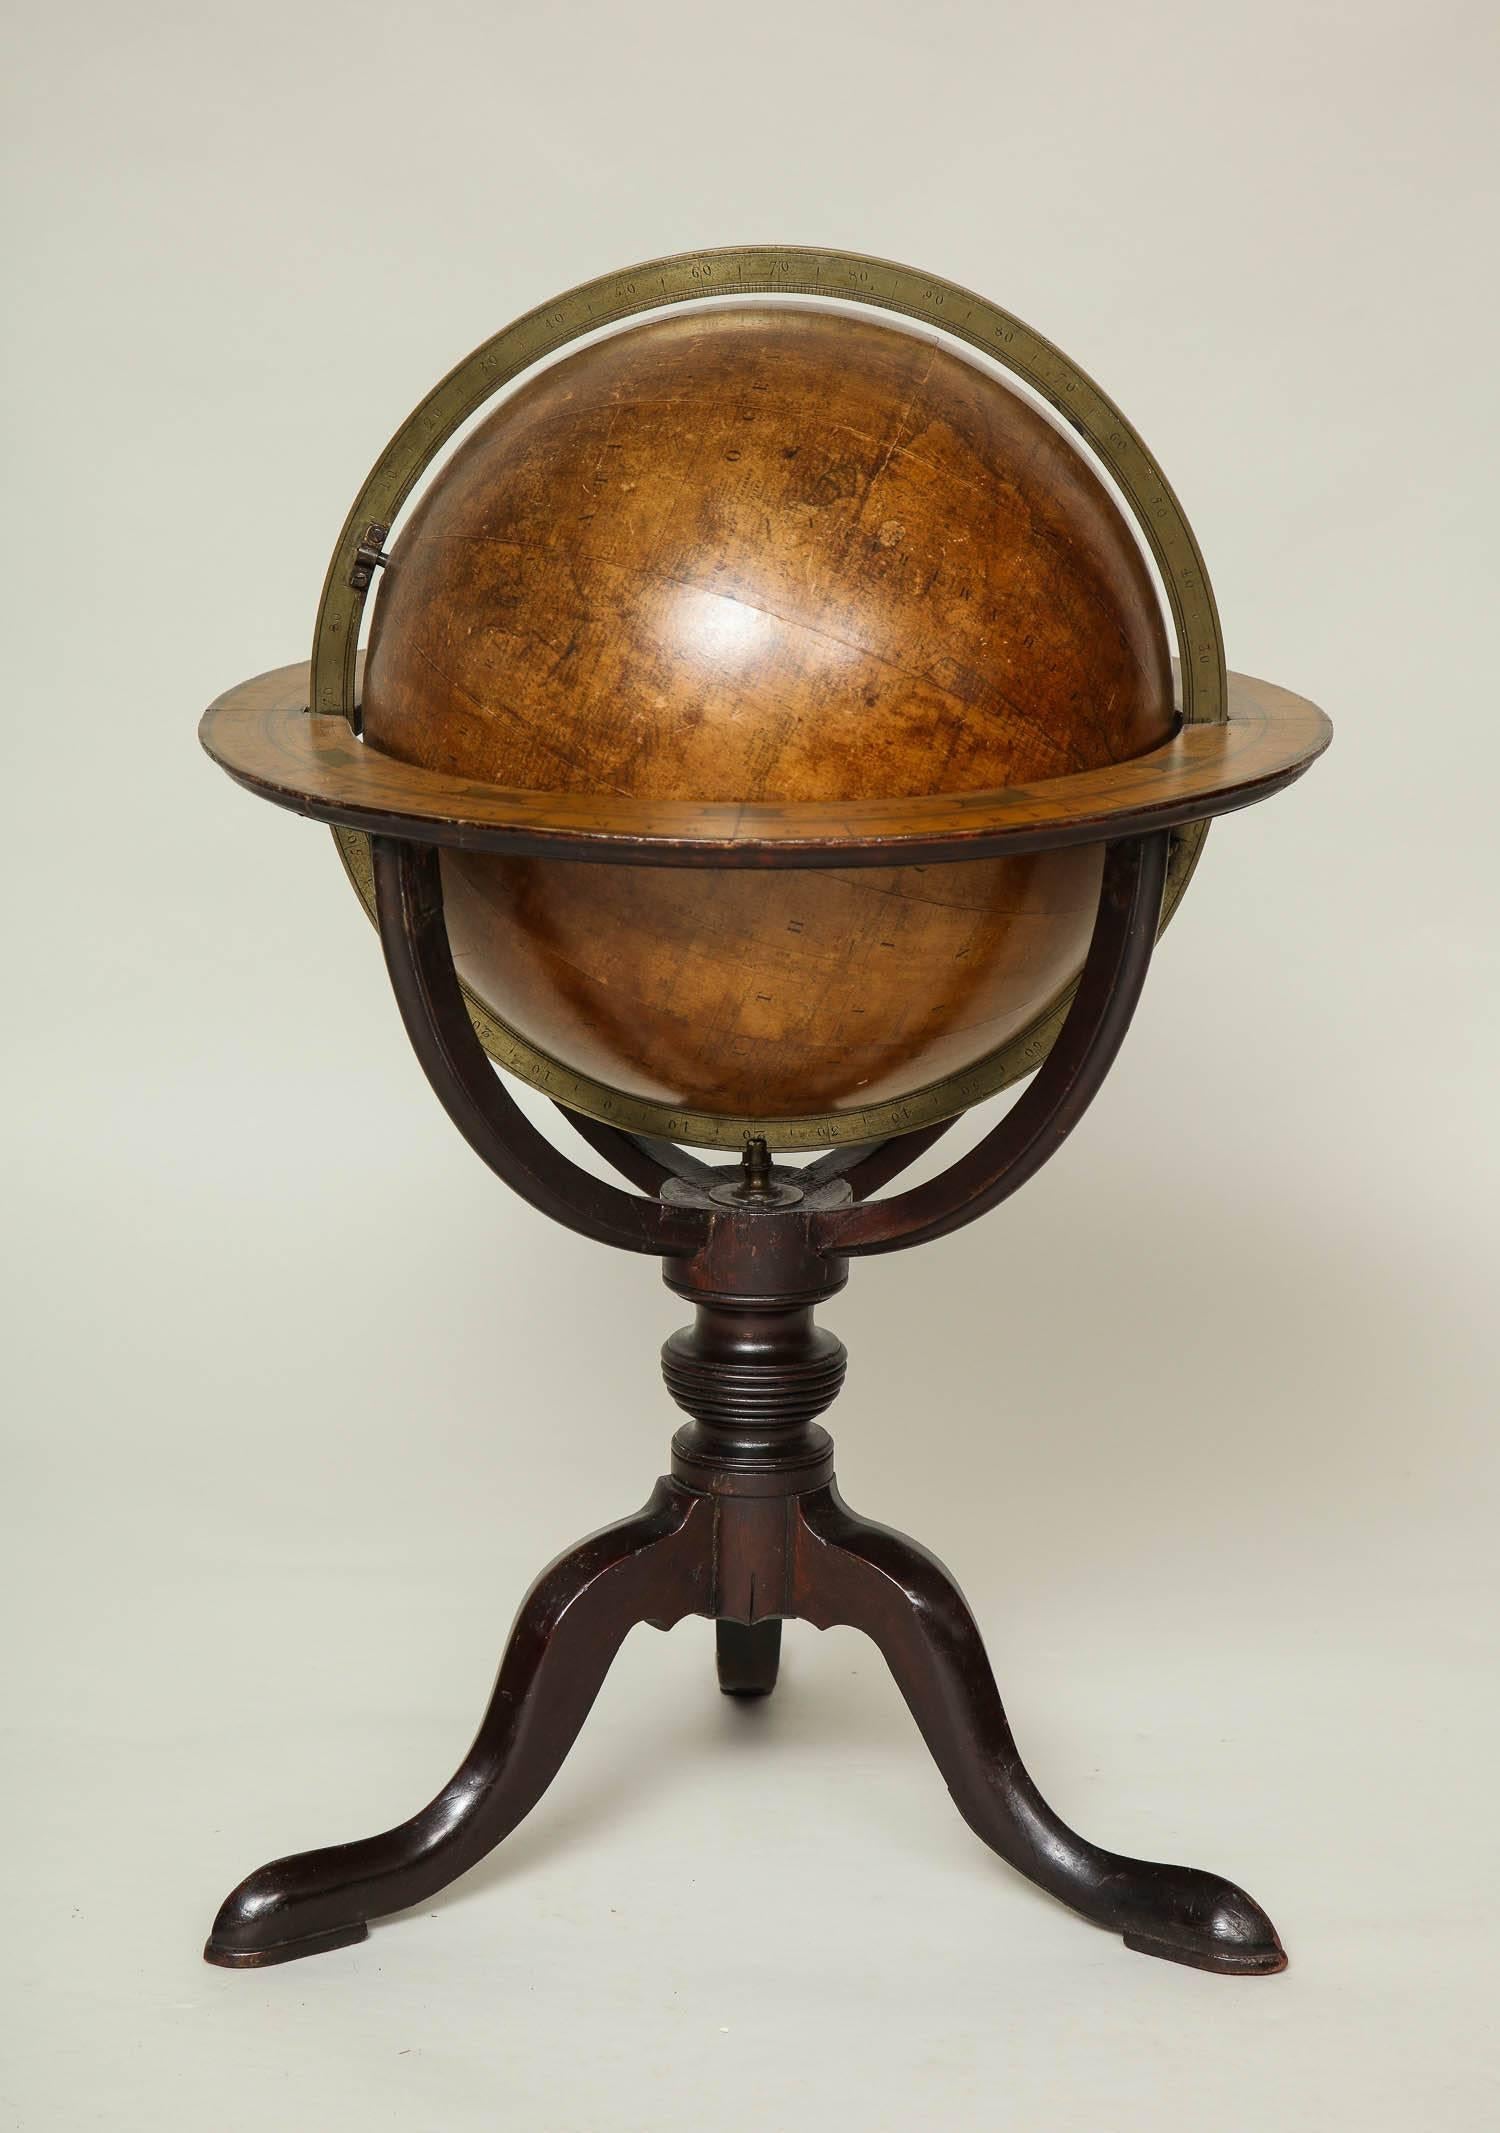 Paper Assembled Pair of Georgian Celestial and Terrestrial Globes